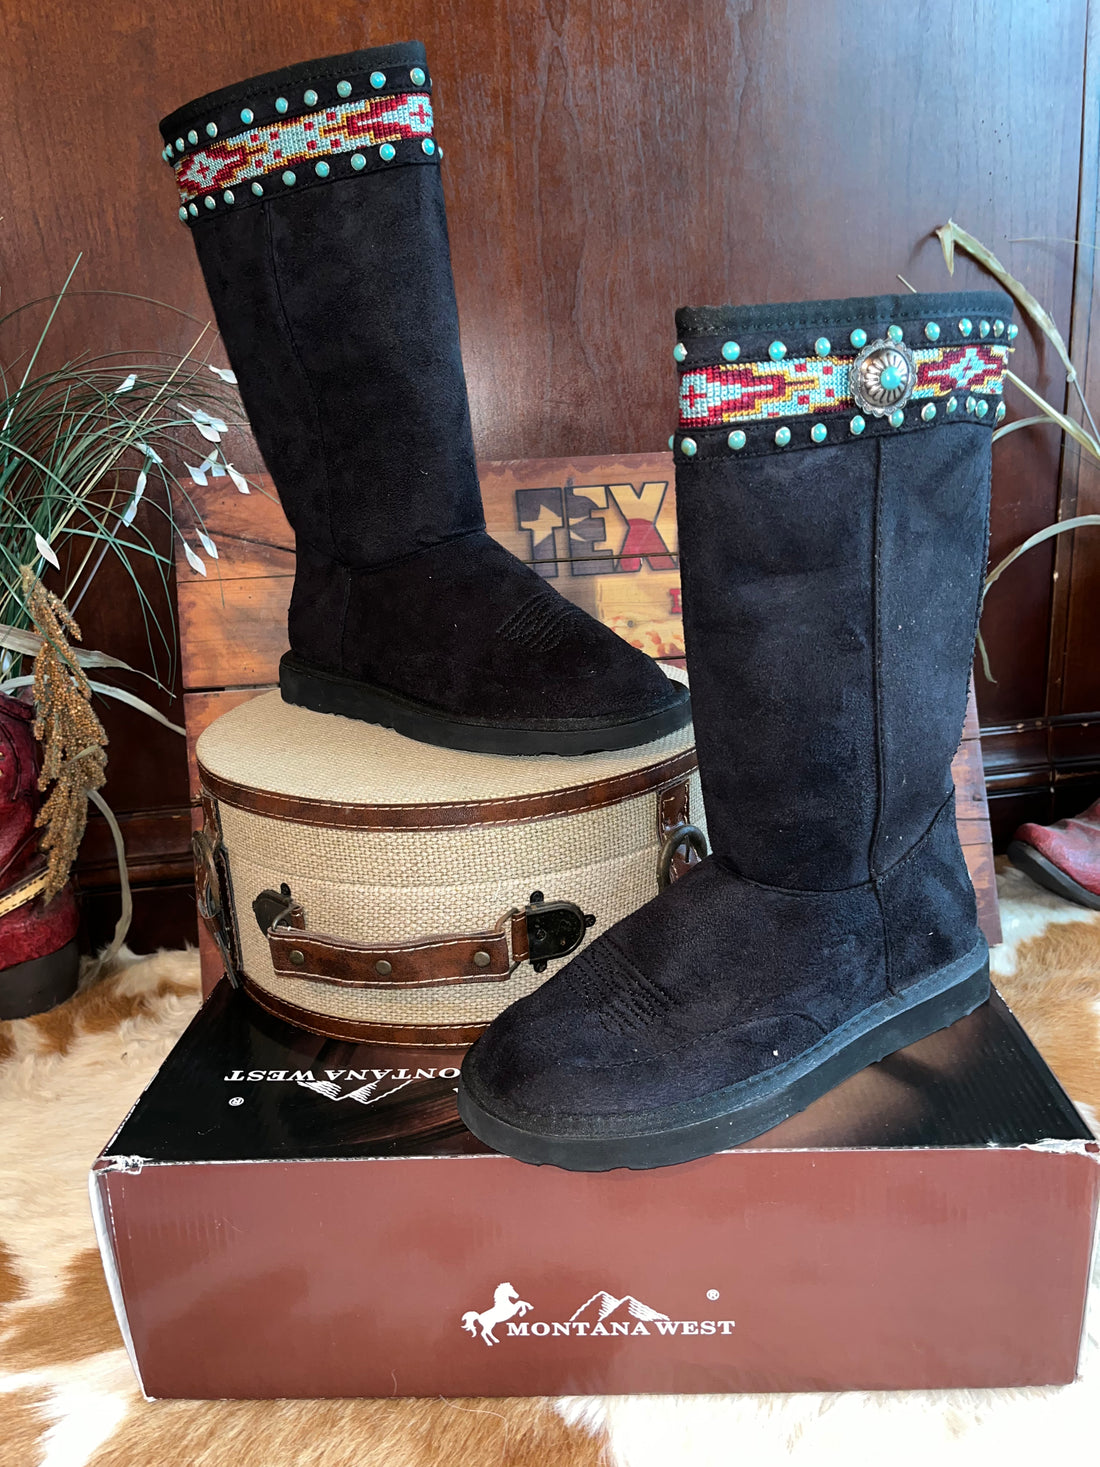 Montana West Mid Calf Black Fur Lined Boots with Aztec Tapestry and Turquoise Stones